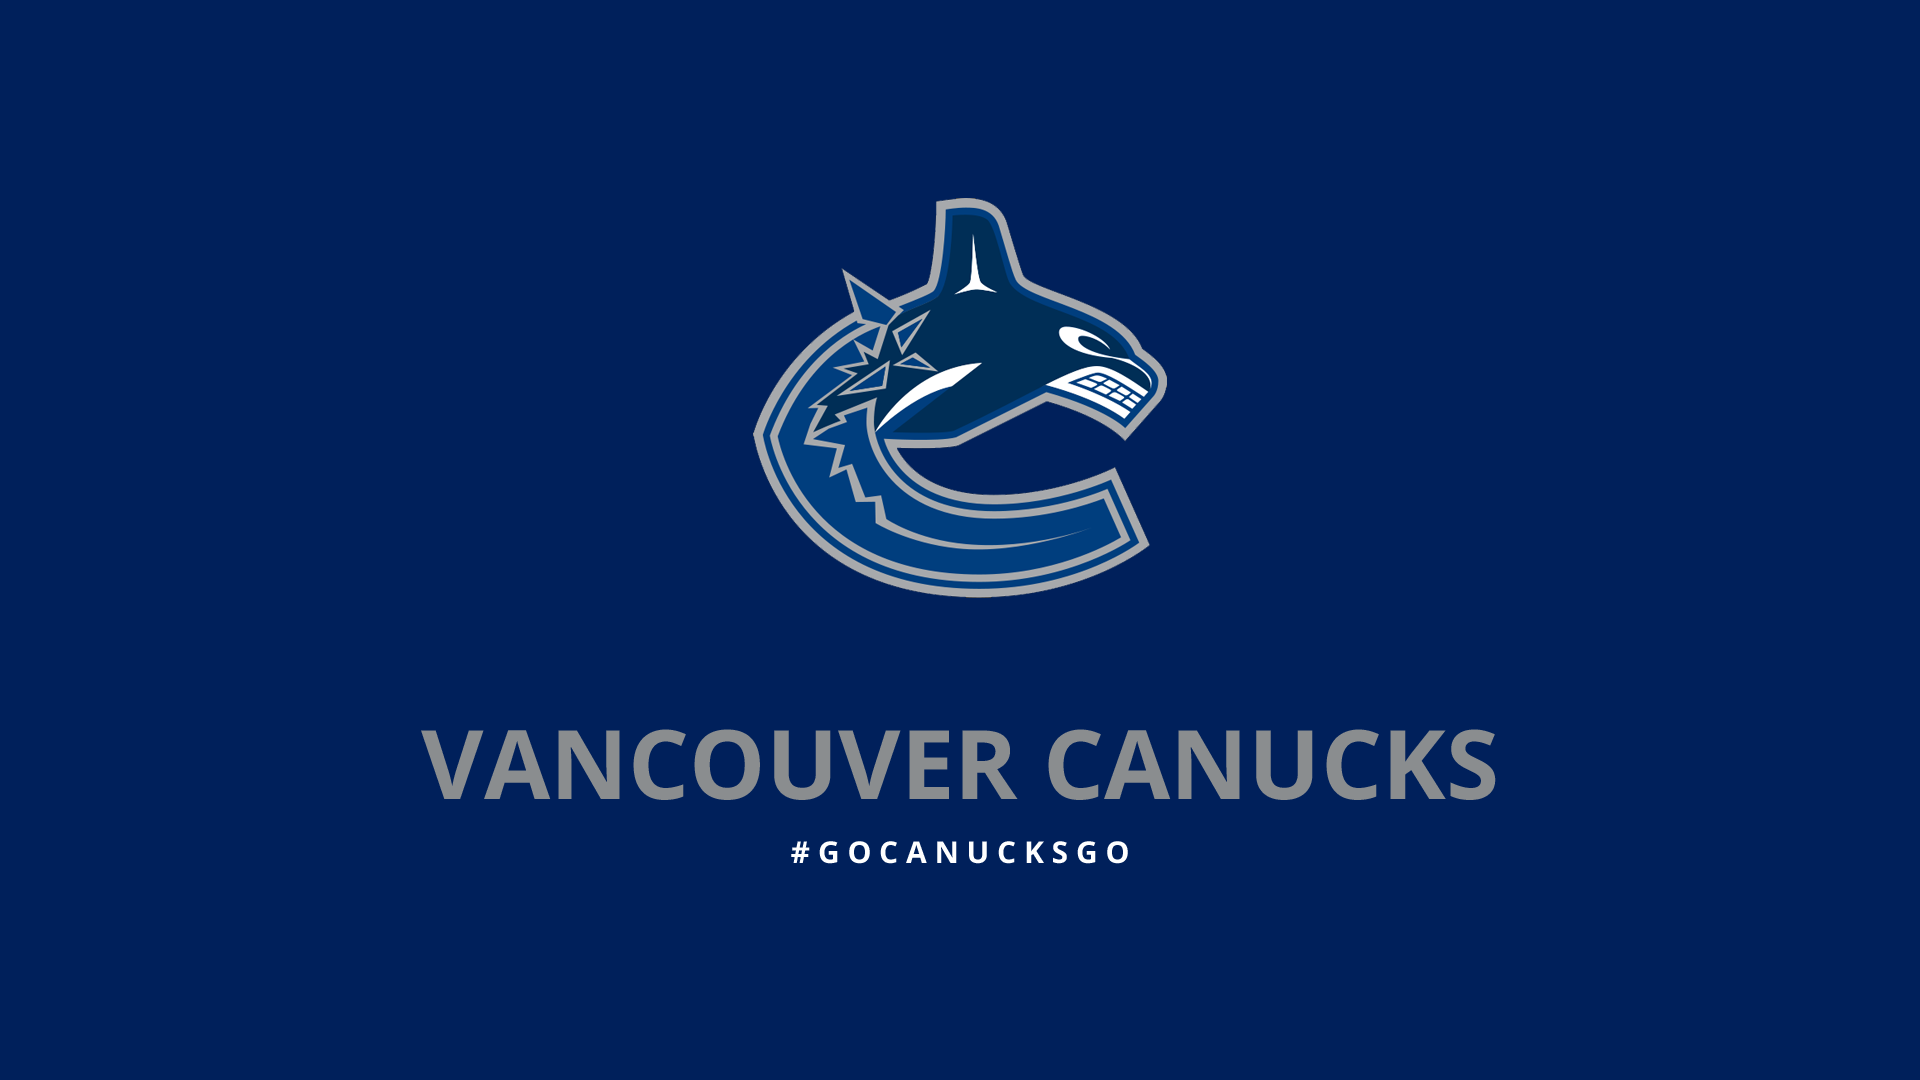 Wonderful Vancouver Canucks Wallpaper Full HD Pictures